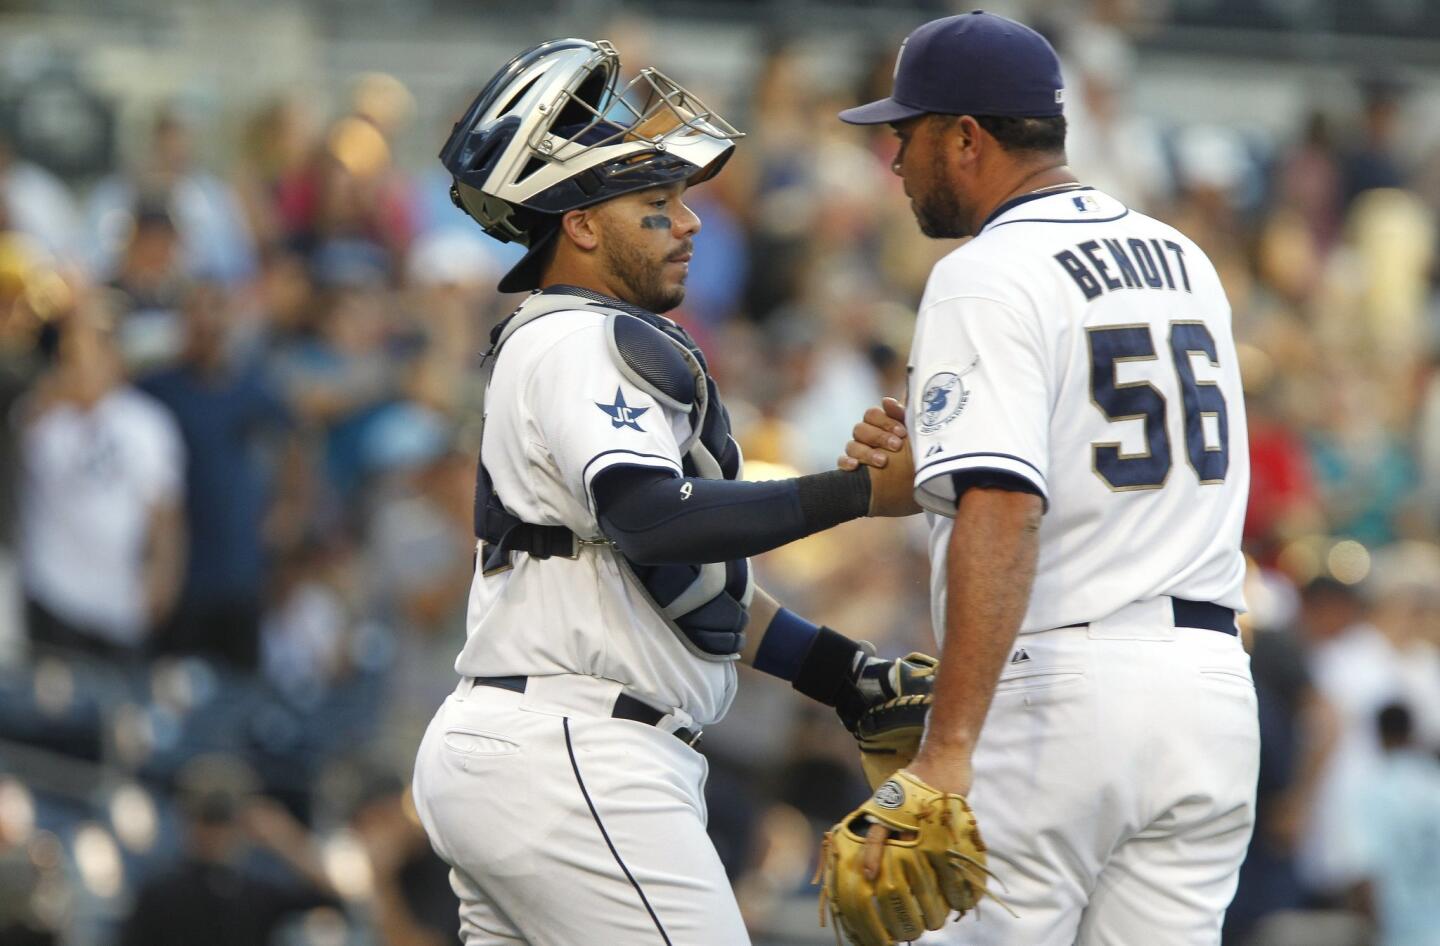 The Padres' closing pitcher Joaquin Benoit and catcher Rene Rivera celebrate the Padres 5-3 win to sweep the Rockies.